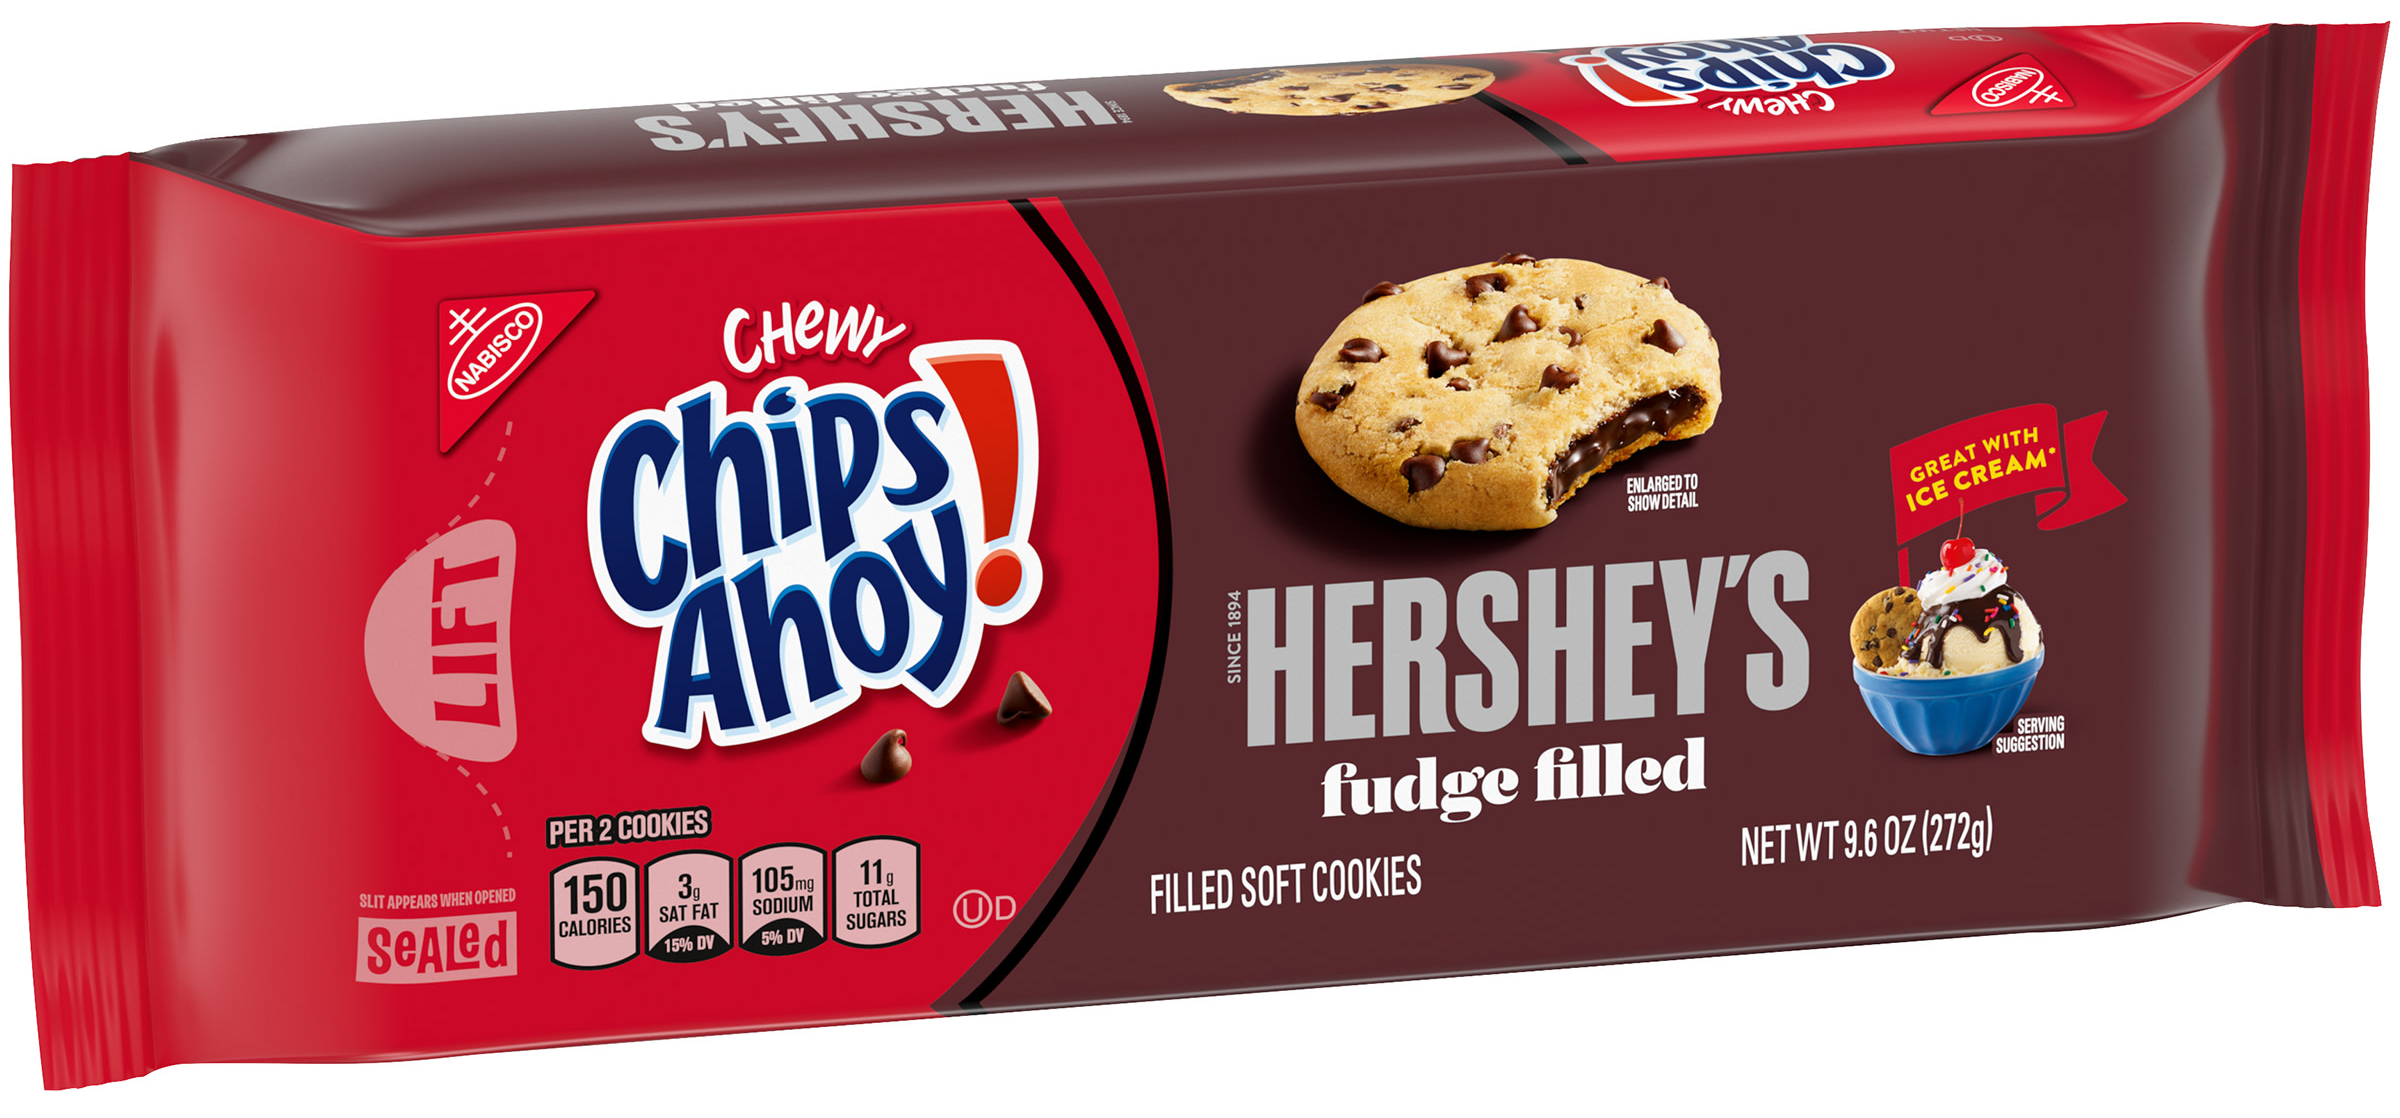 Chewy Chips Ahoy Fudge Filled Cookies